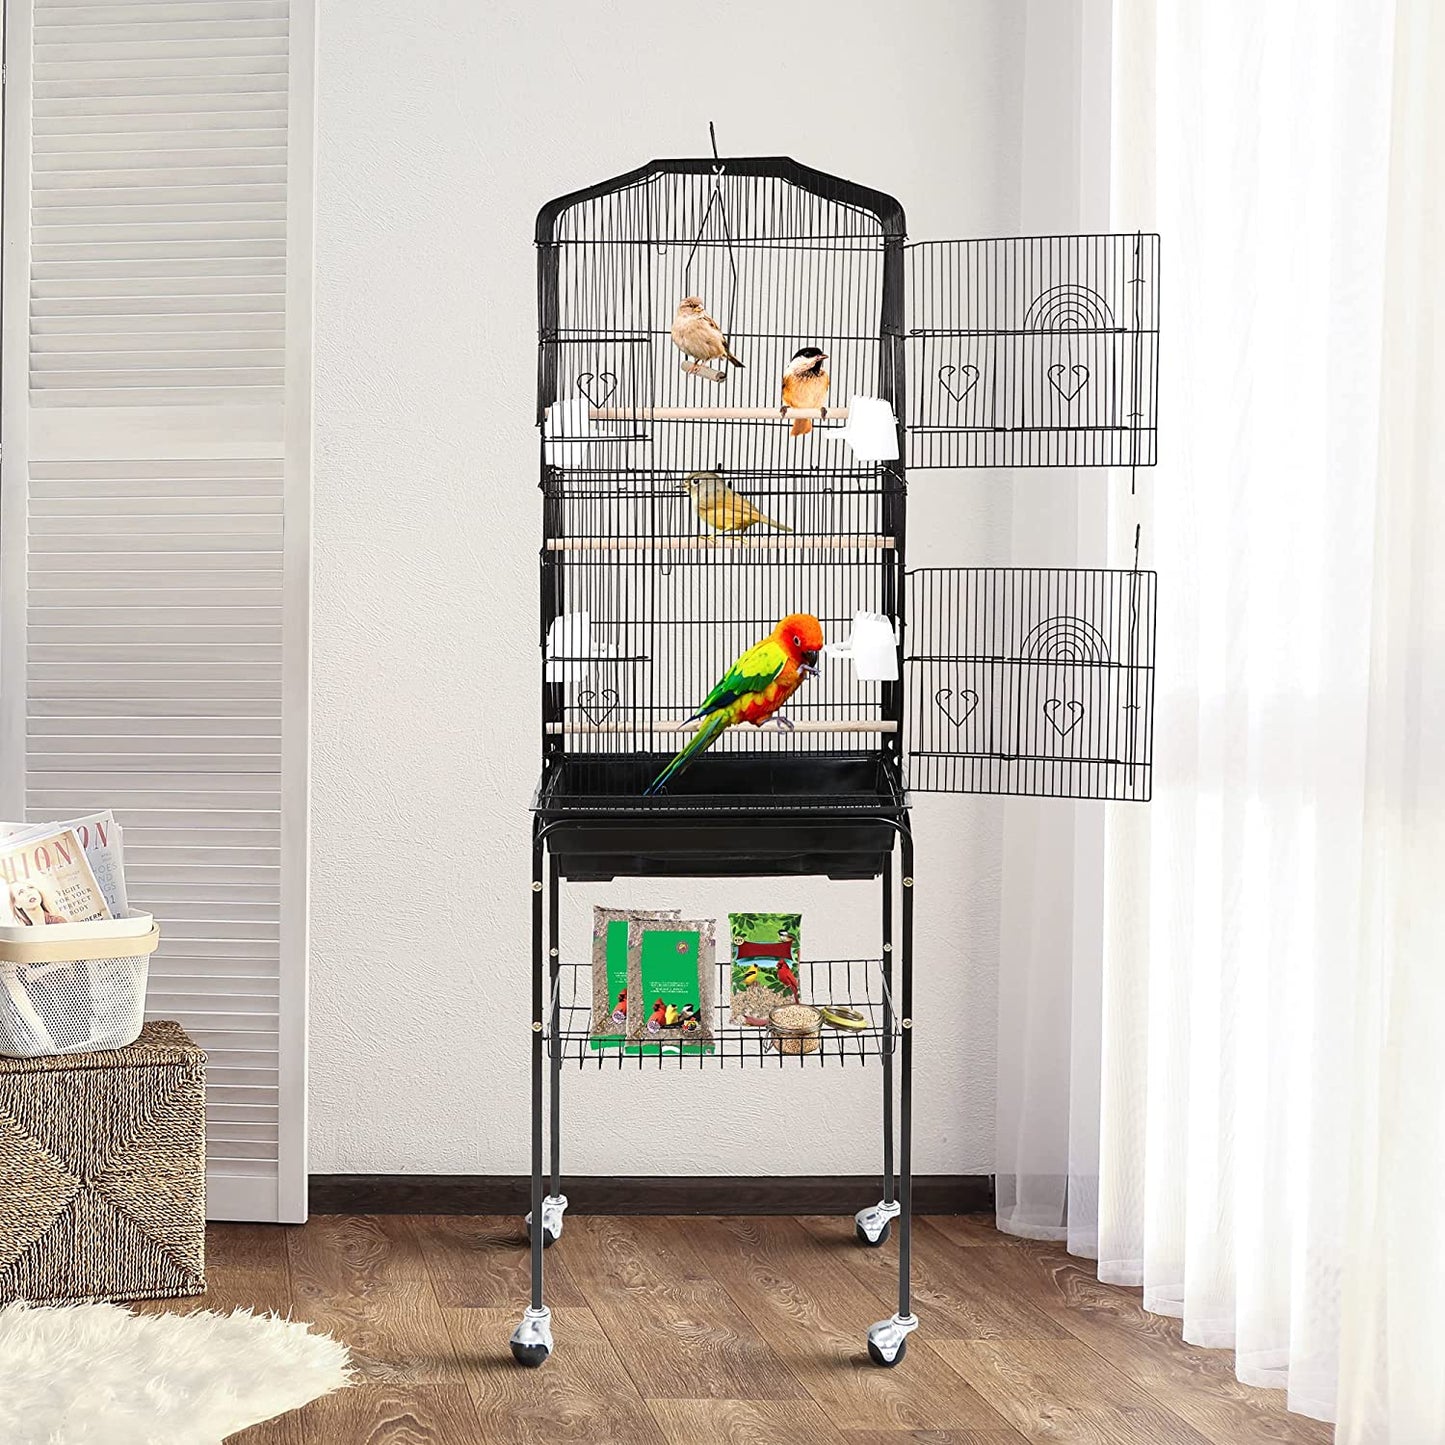 59.3 Inch Bird Cage, Rolling Wrought Iron Parrot Cage with Side-Out Tray, Storage Shelf, Pet Bird House for Parrot Cockatiel Cockatoo Parakeet Macaw Finches